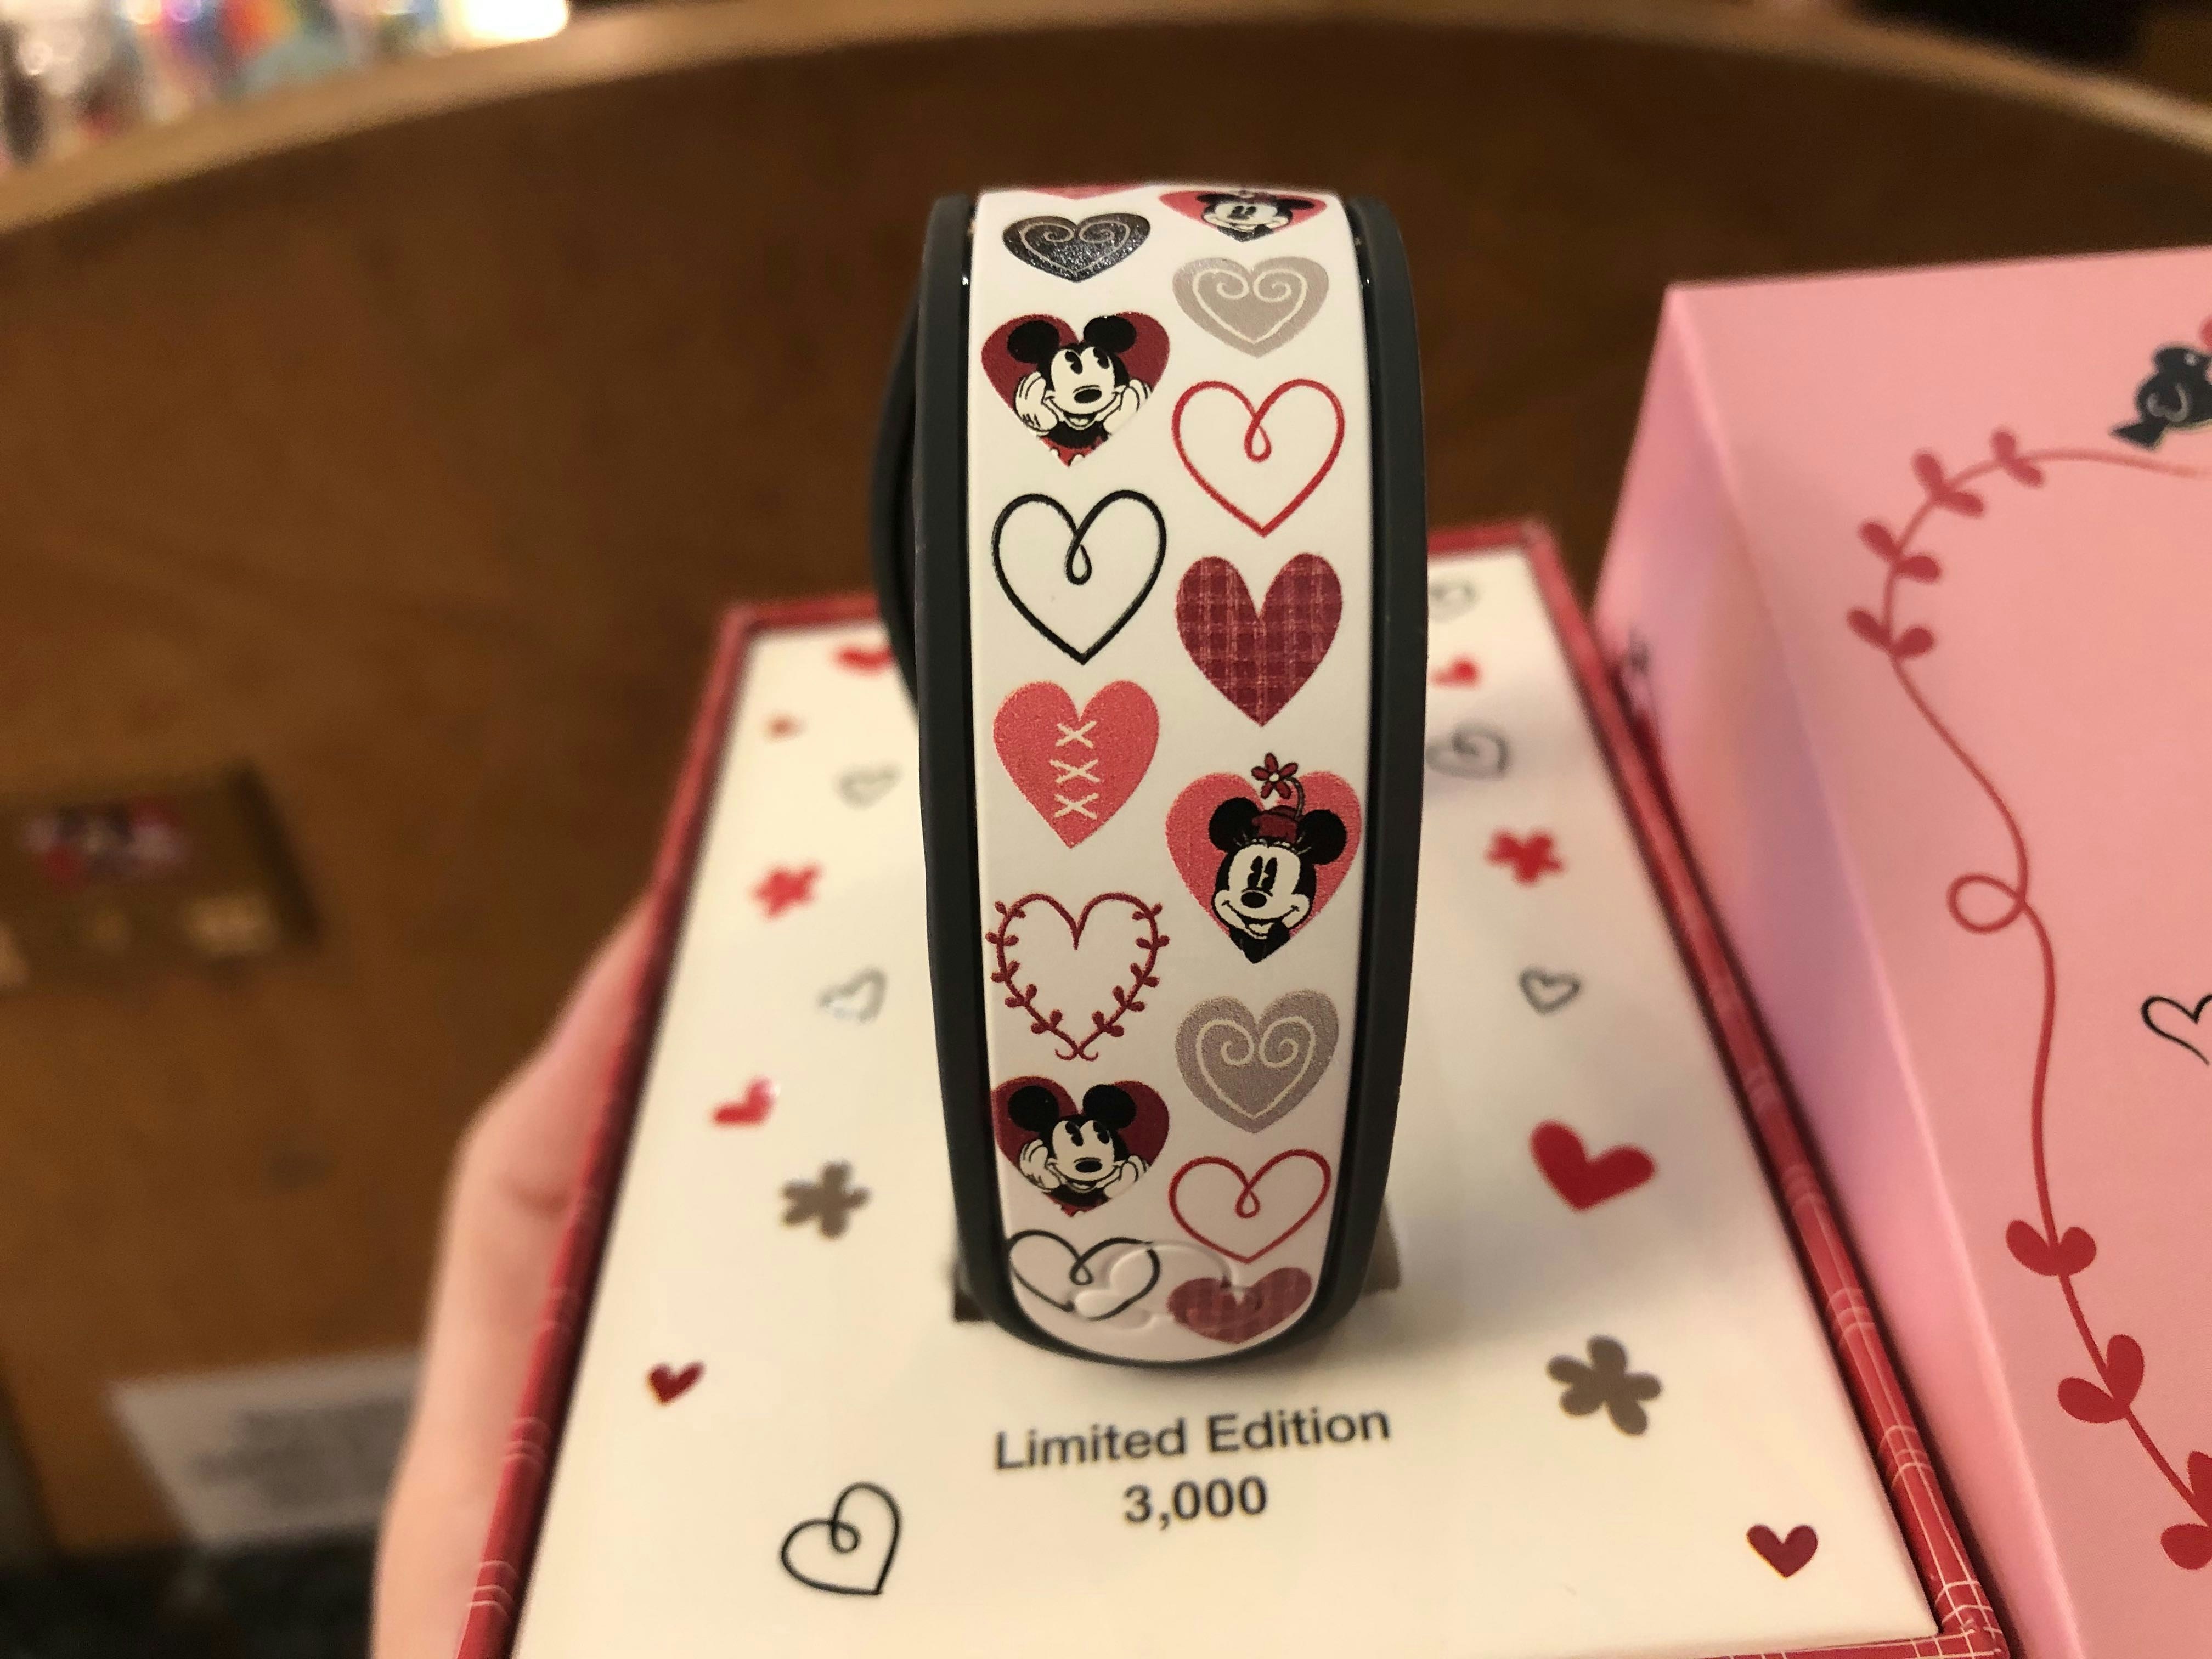 valentines day limited edition magicband 2020 5.jpg?auto=compress%2Cformat&ixlib=php 1.2